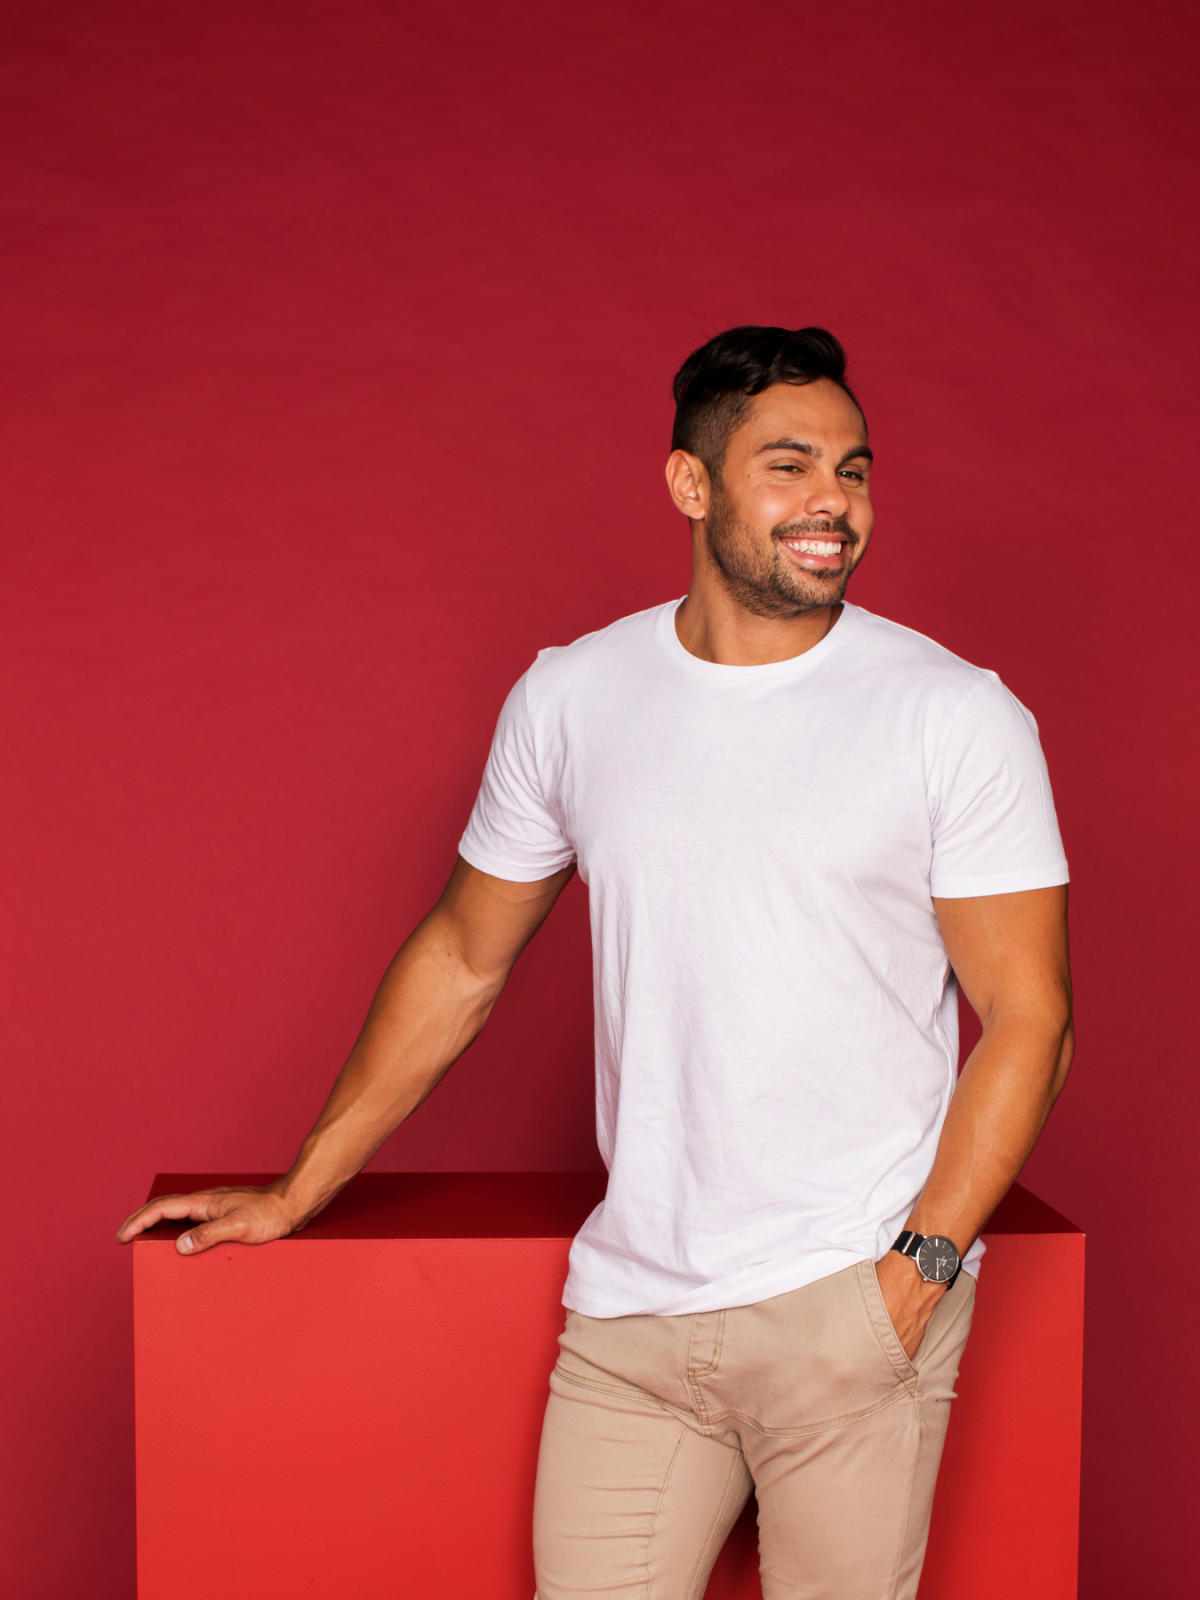 Student smiling with crimson background